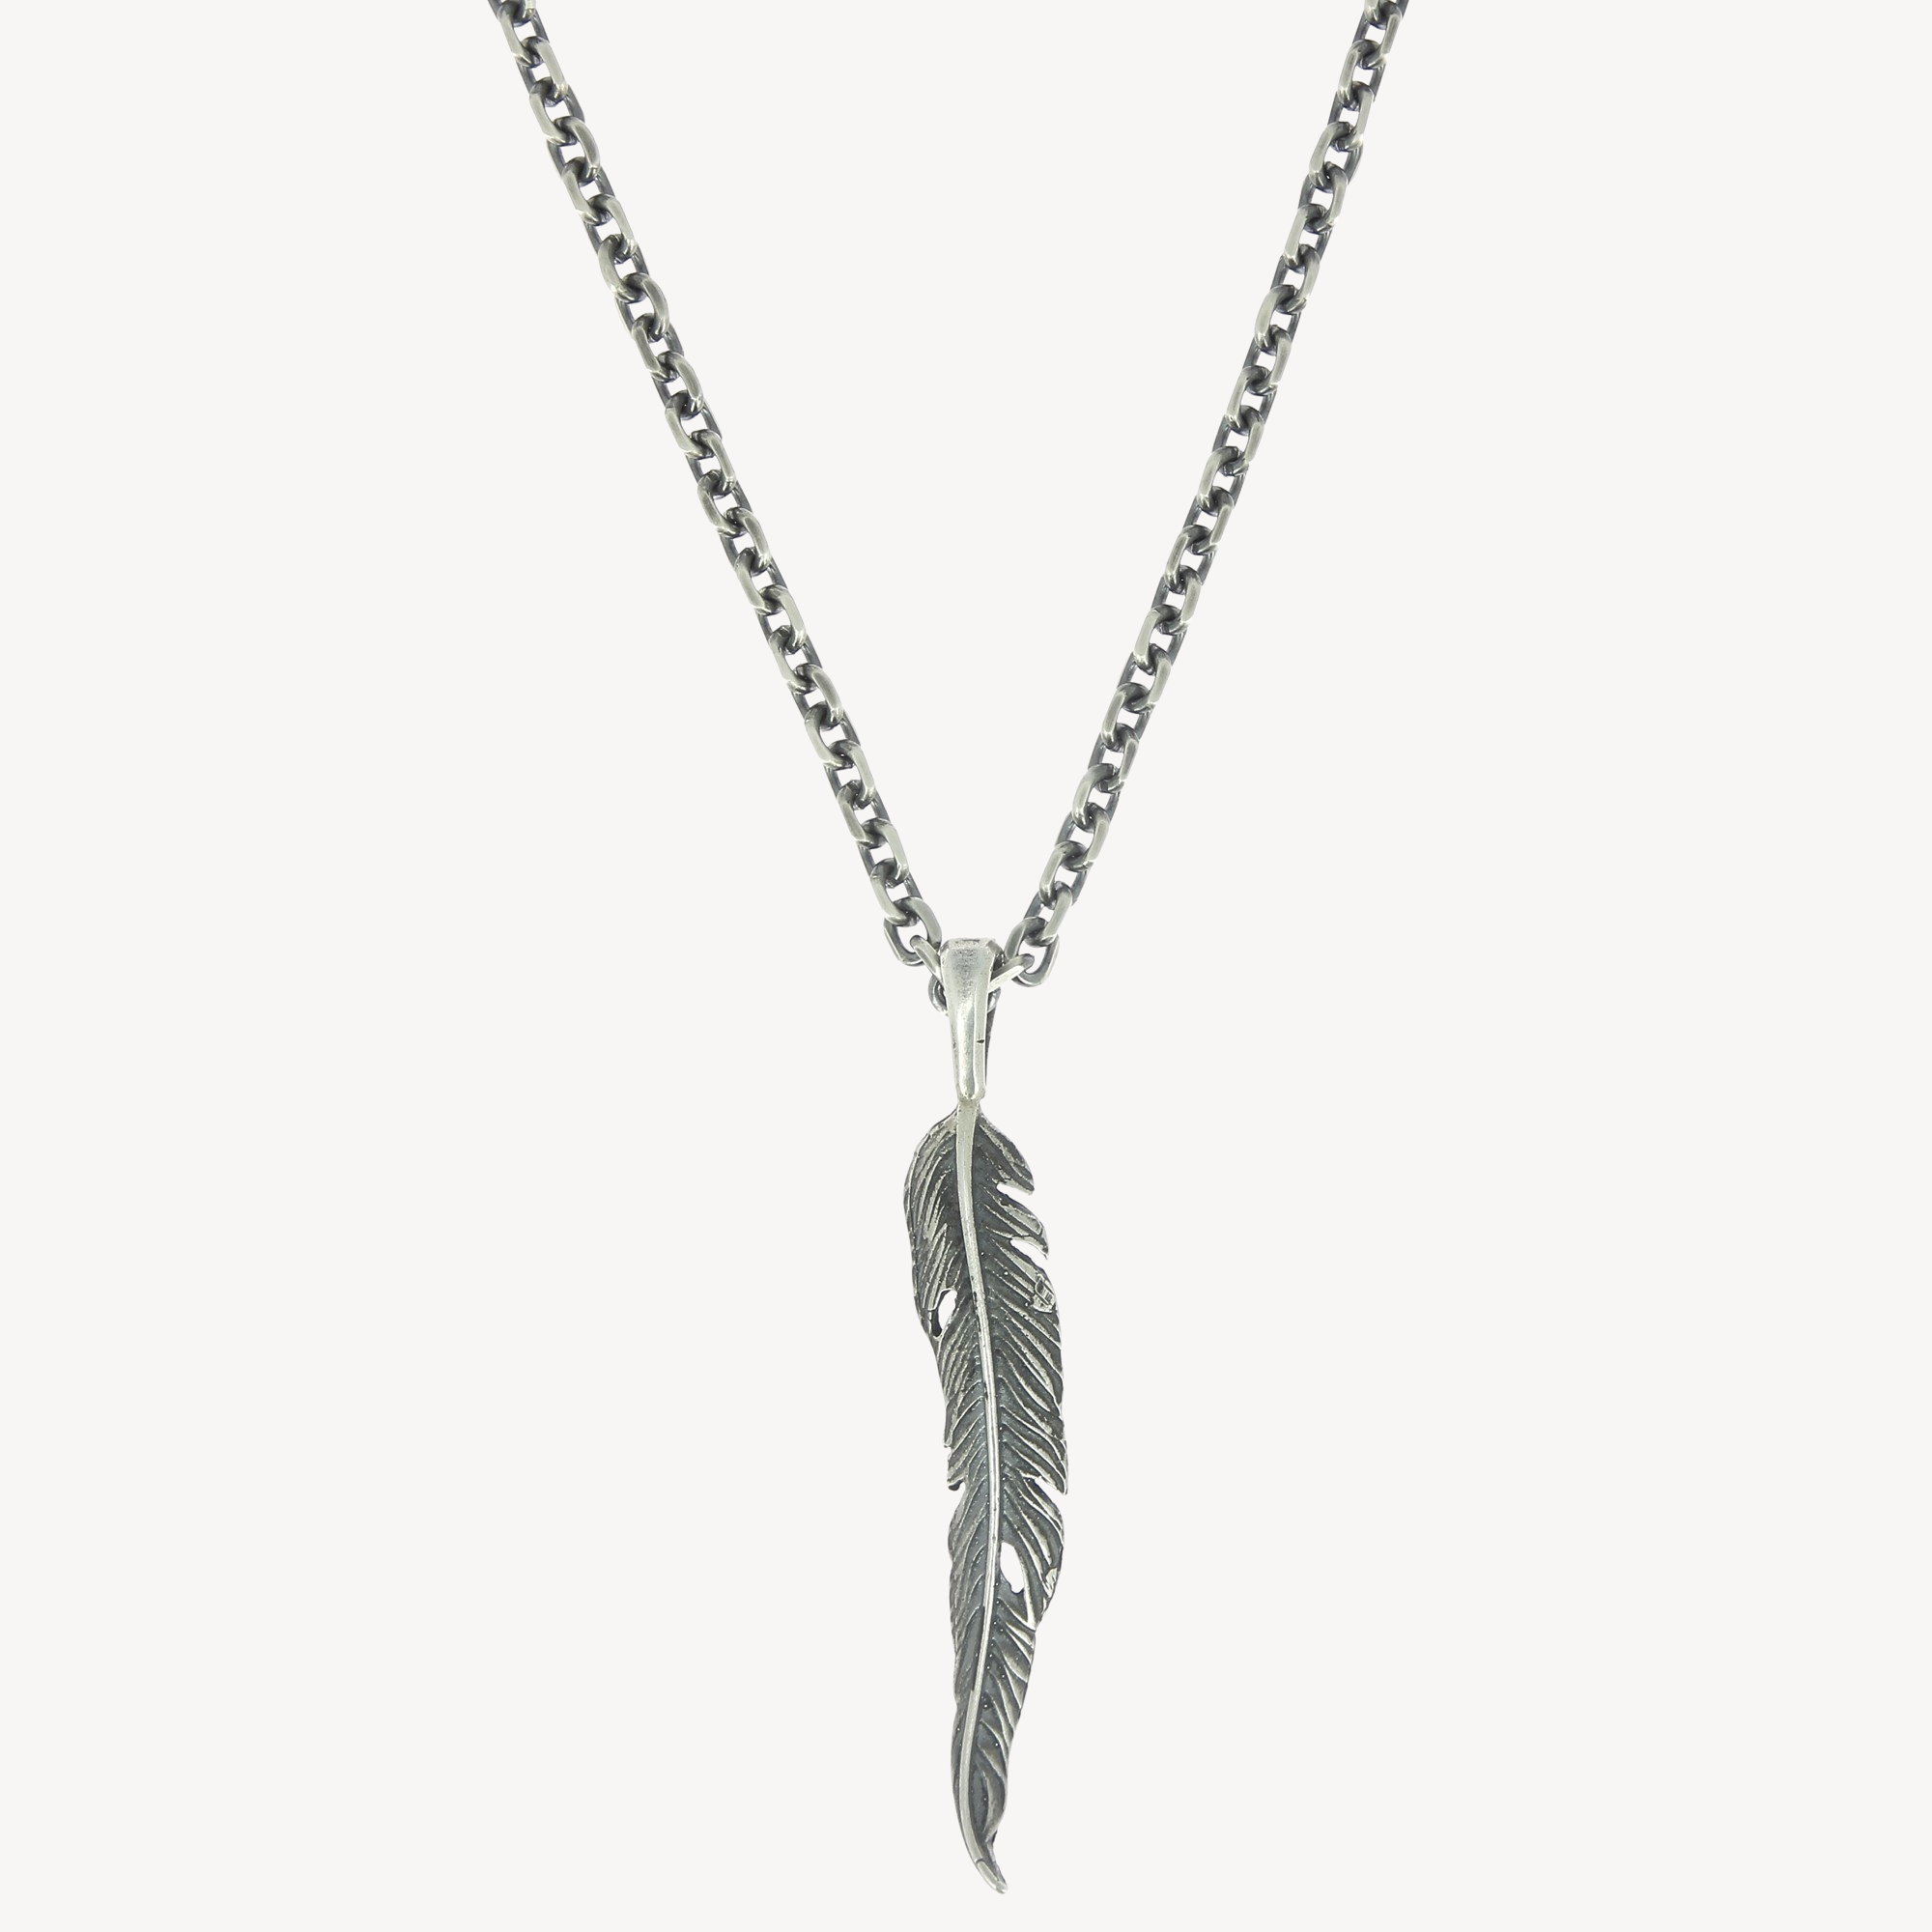 Mad Lords Private by Kameart Feather Necklace - Mad Private - Necklaces for Men - Mad Lords